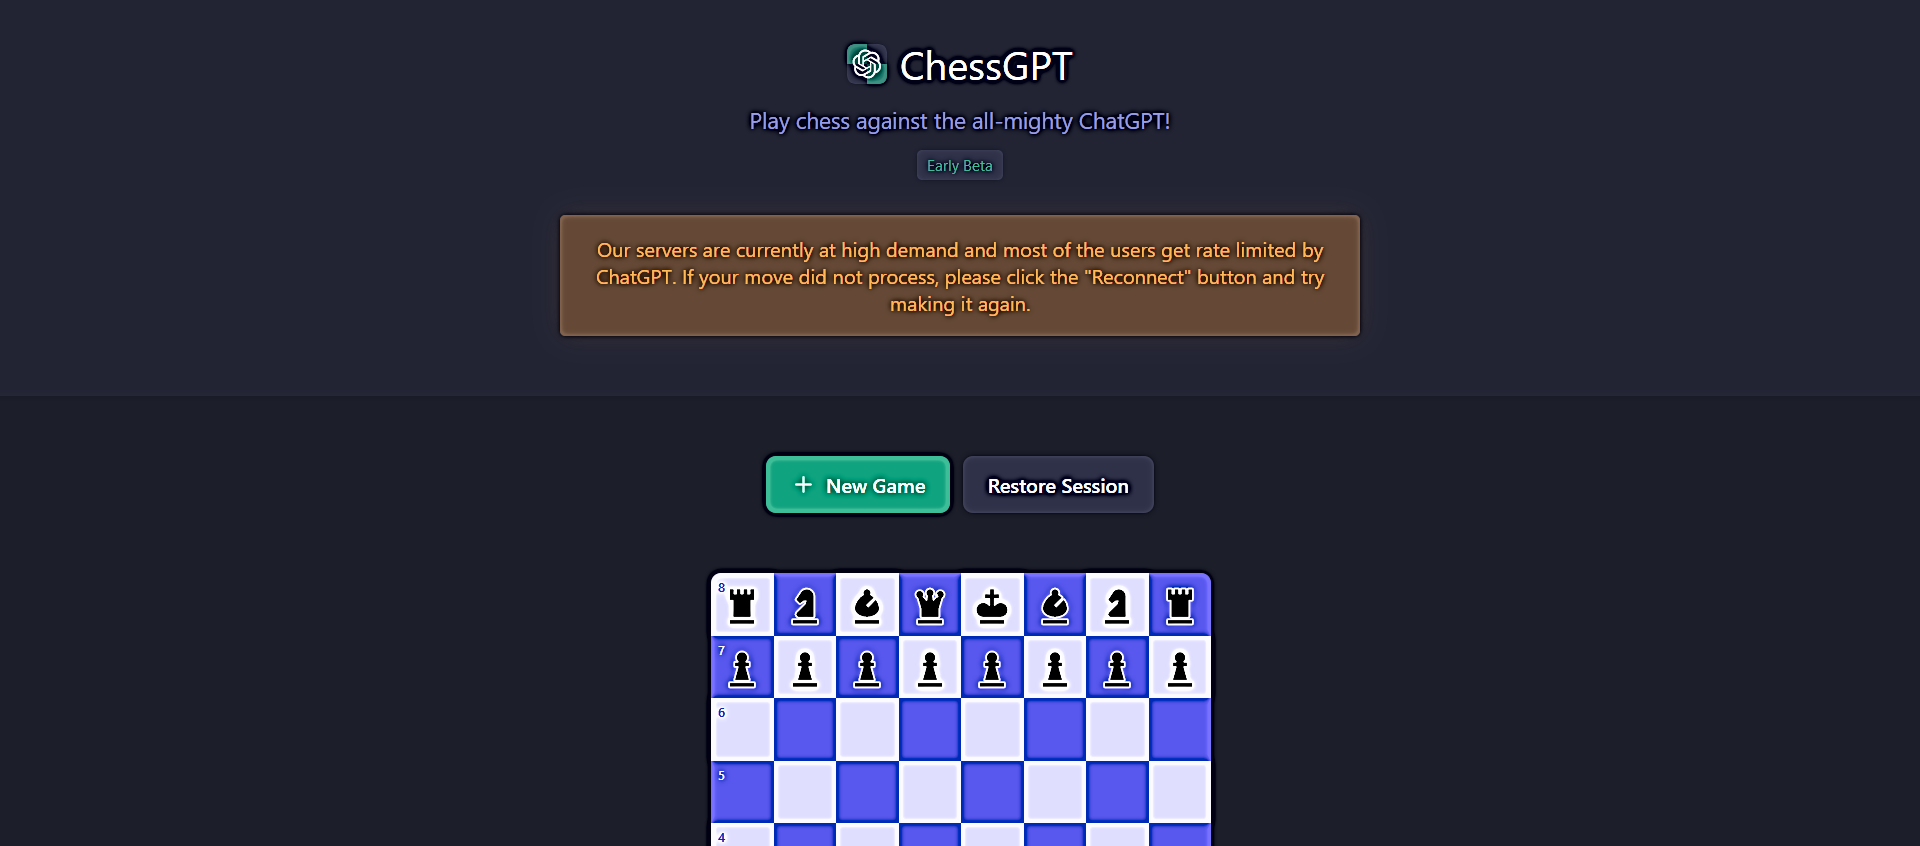 ChessGPT featured